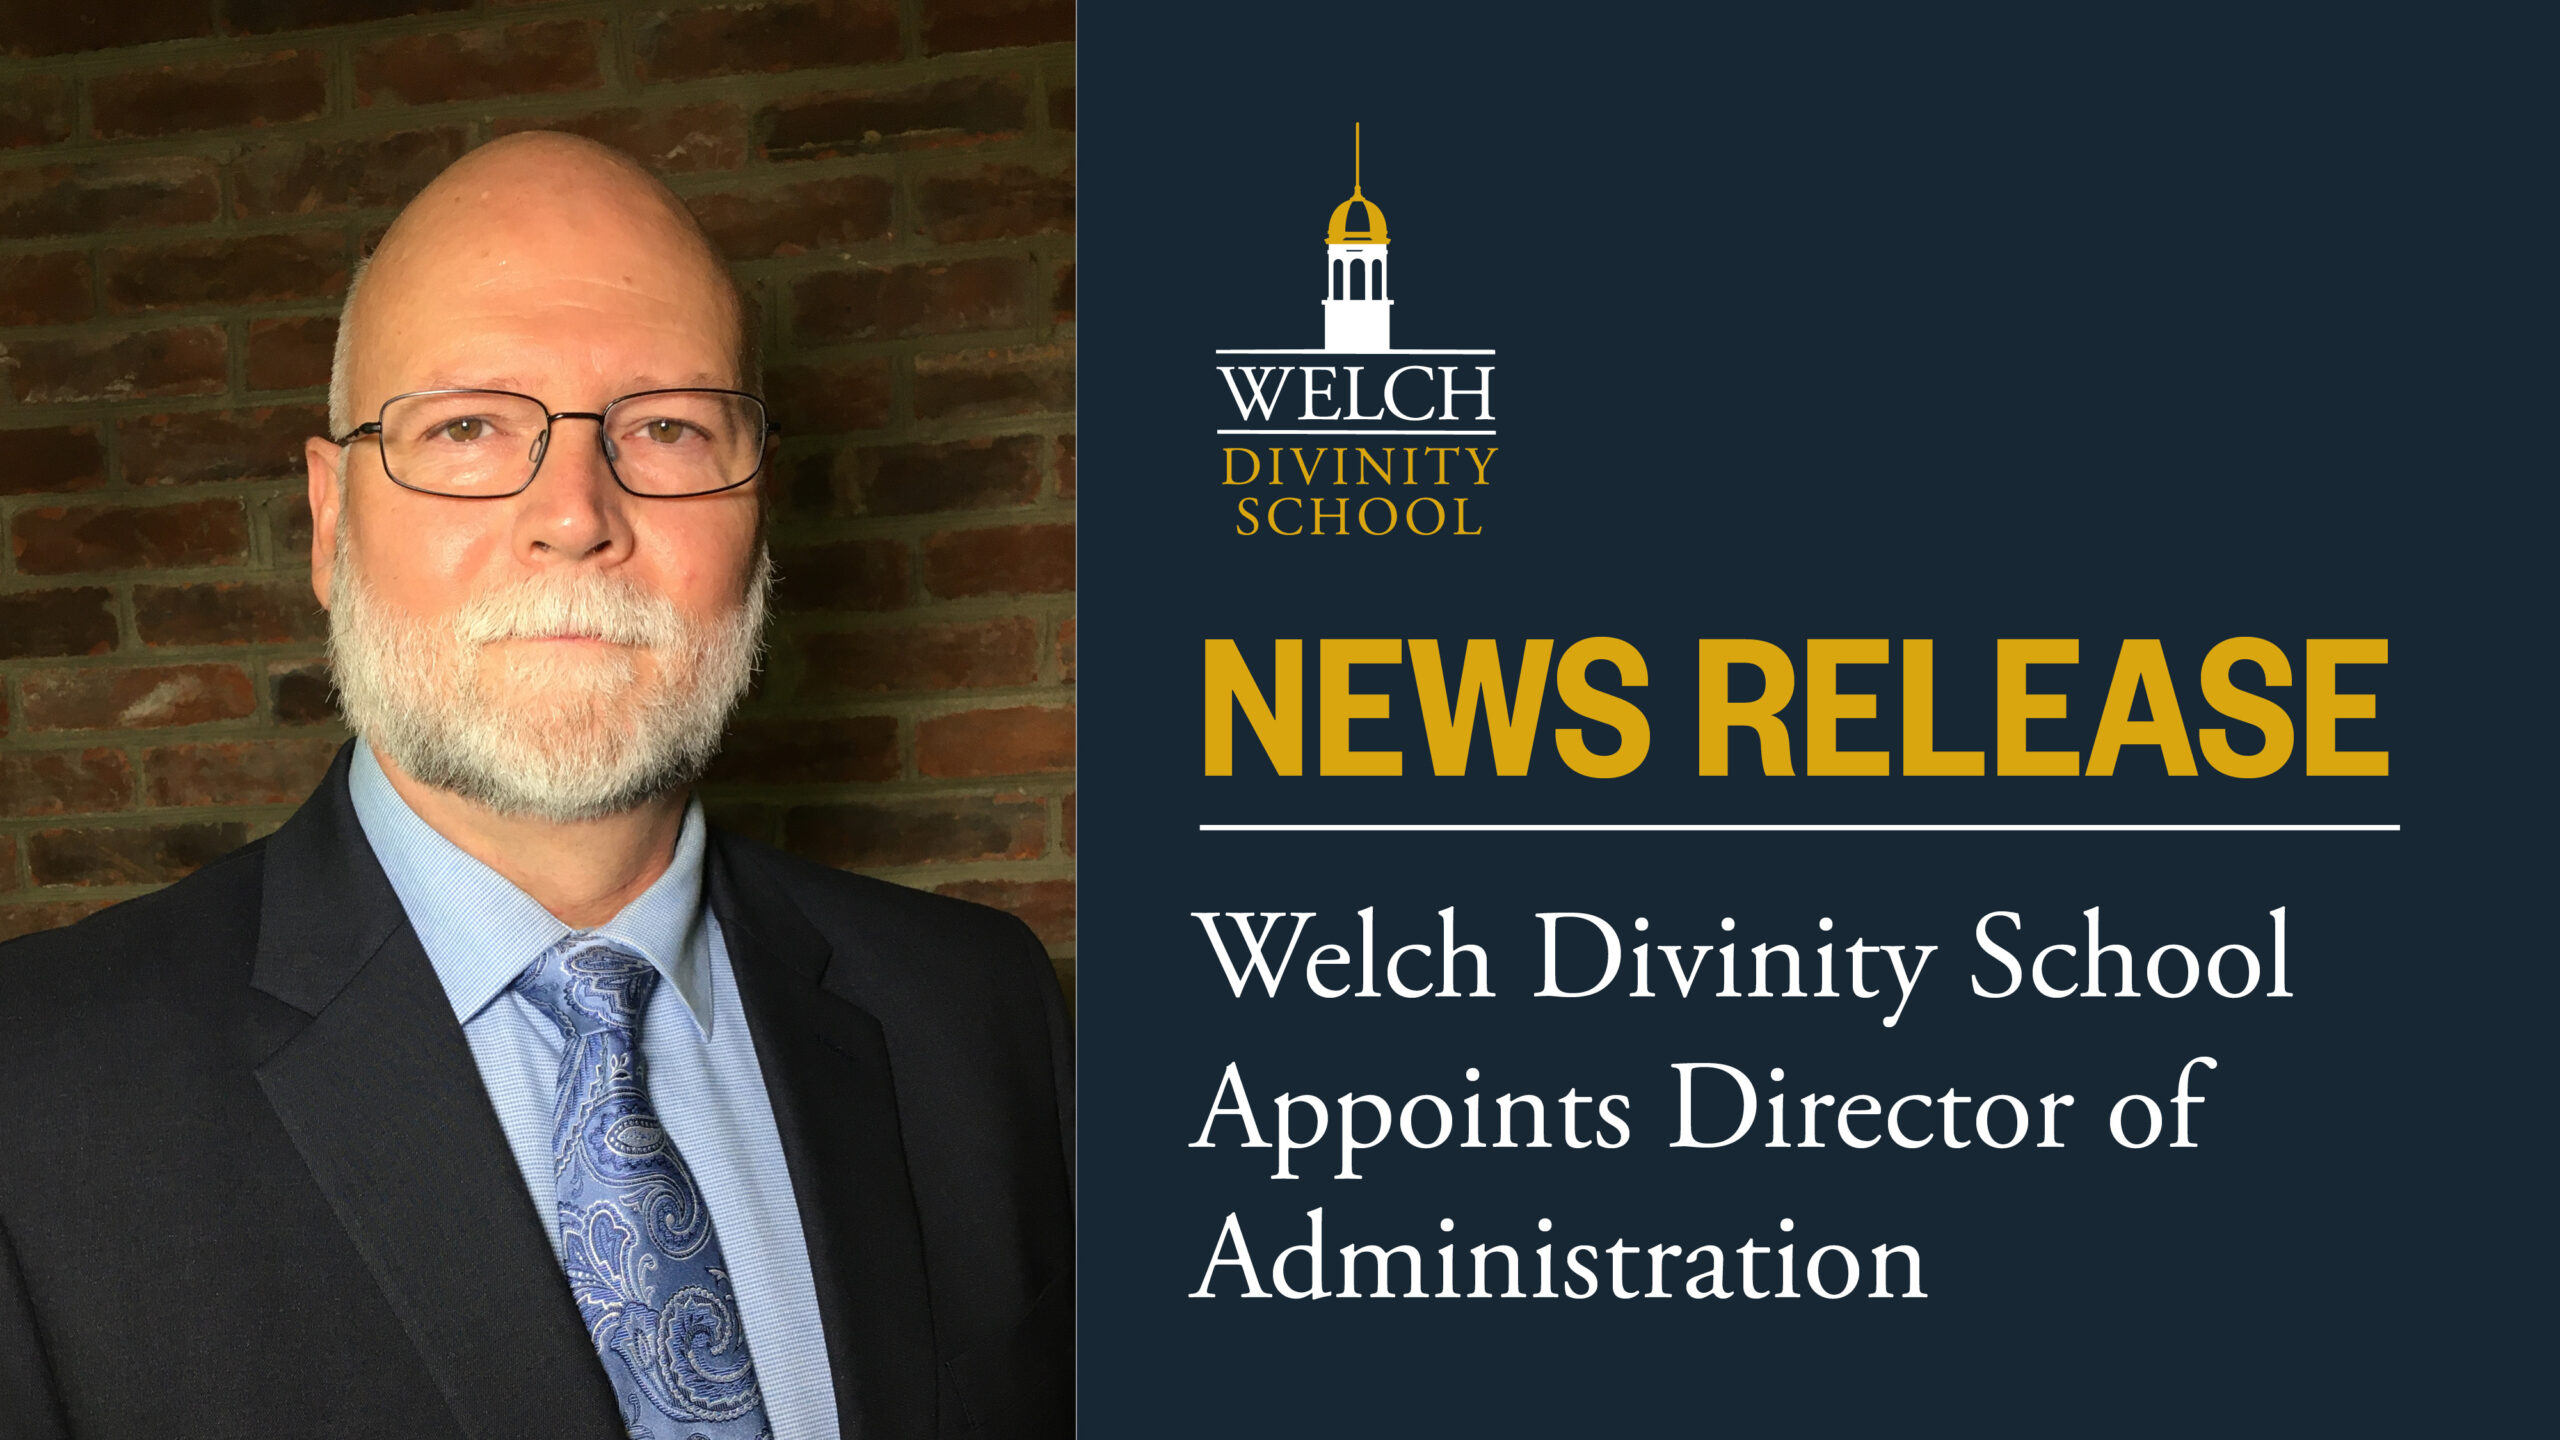 Welch Divinity School Appoints Director of Administration